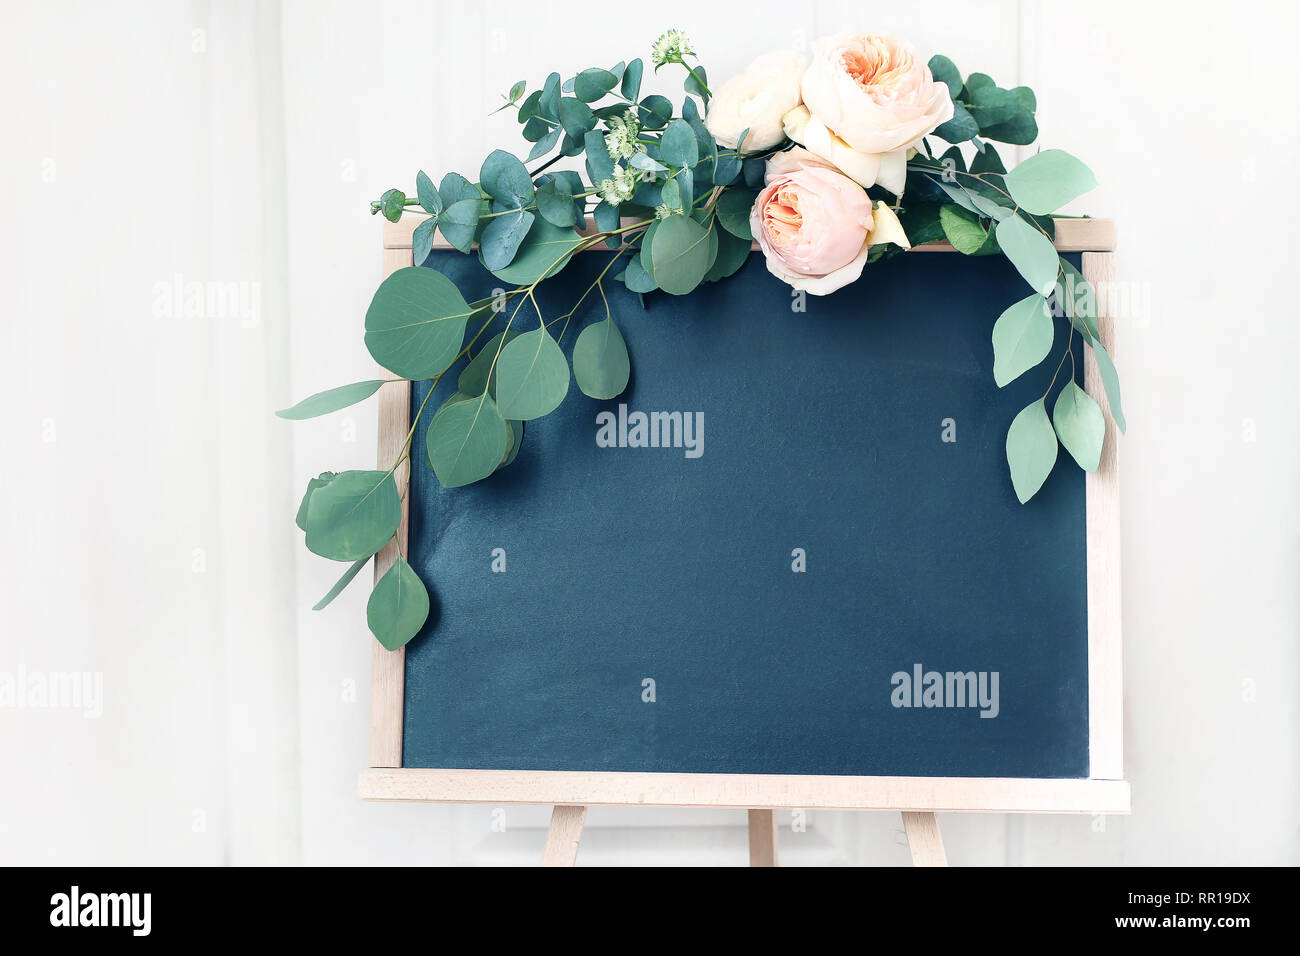 Blank wedding chalkboard sign mockup scene. Floral garland of green eucalyptus branches and apricot English roses flowers. Rustic birthday party Stock Photo